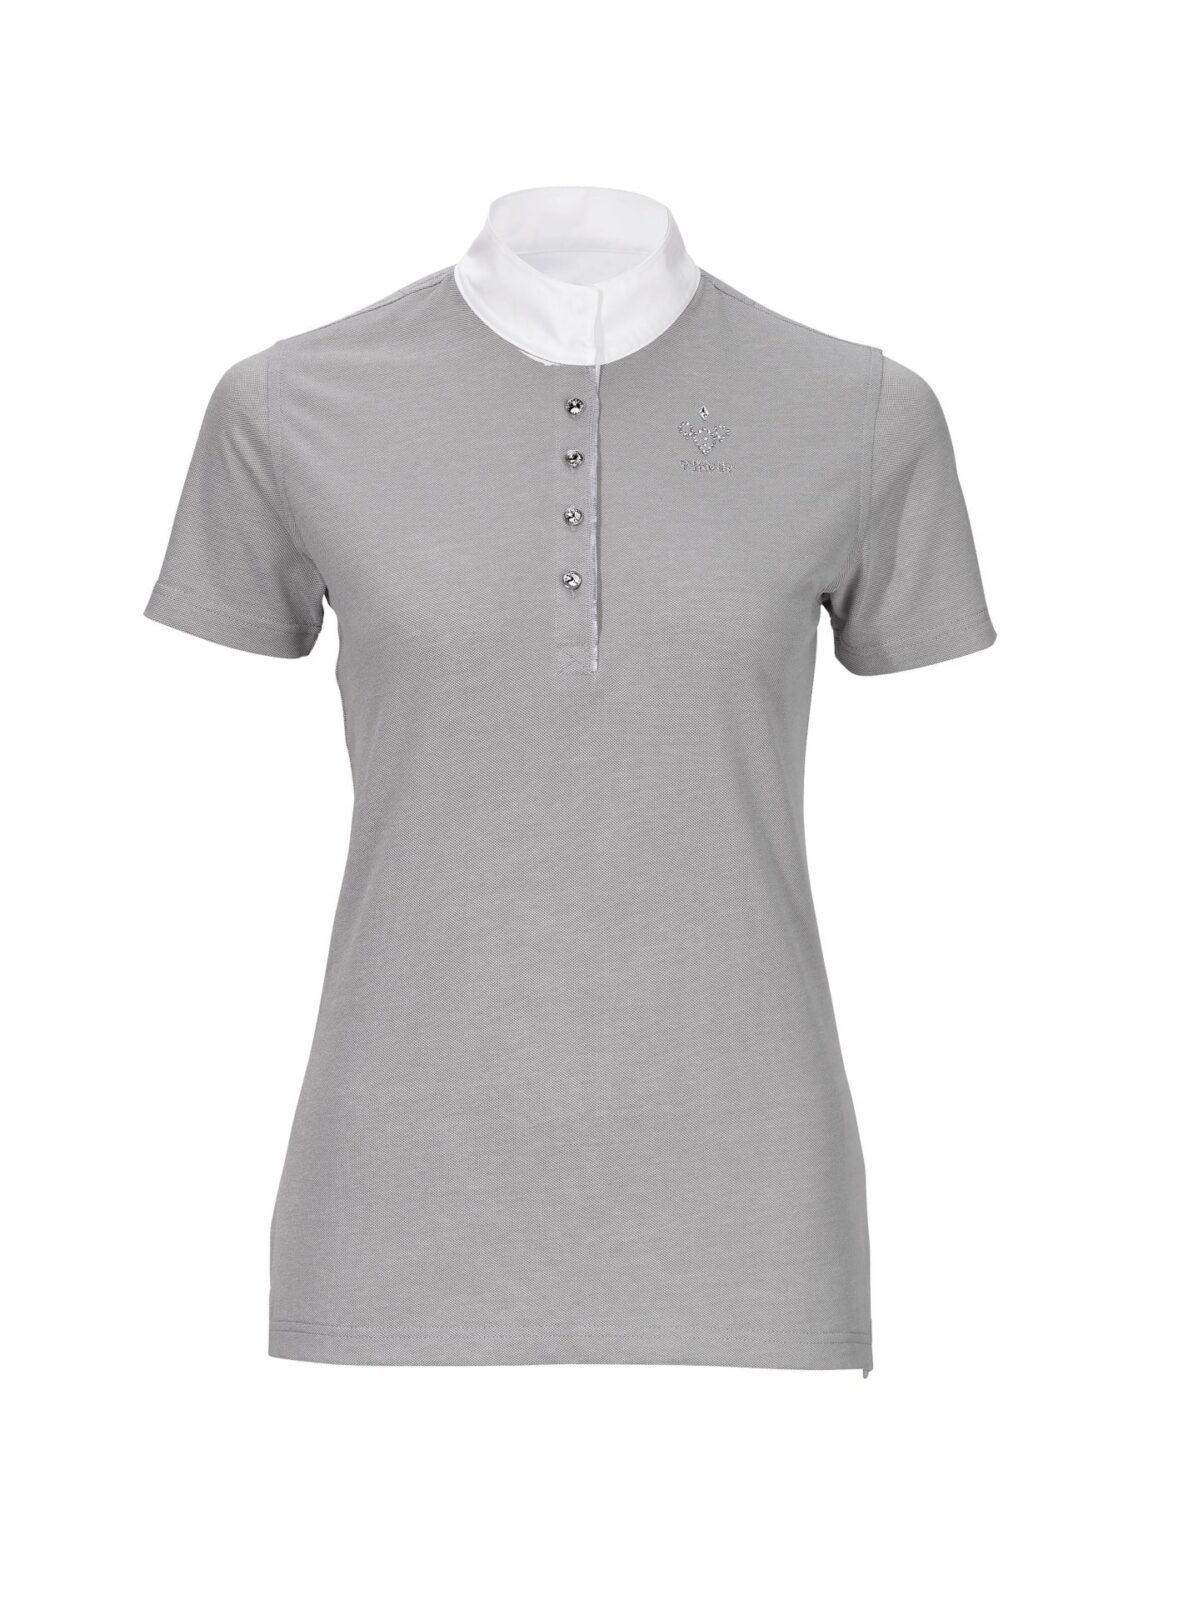 Pikeur Ladies Competition Shirt - Manor Equestrian